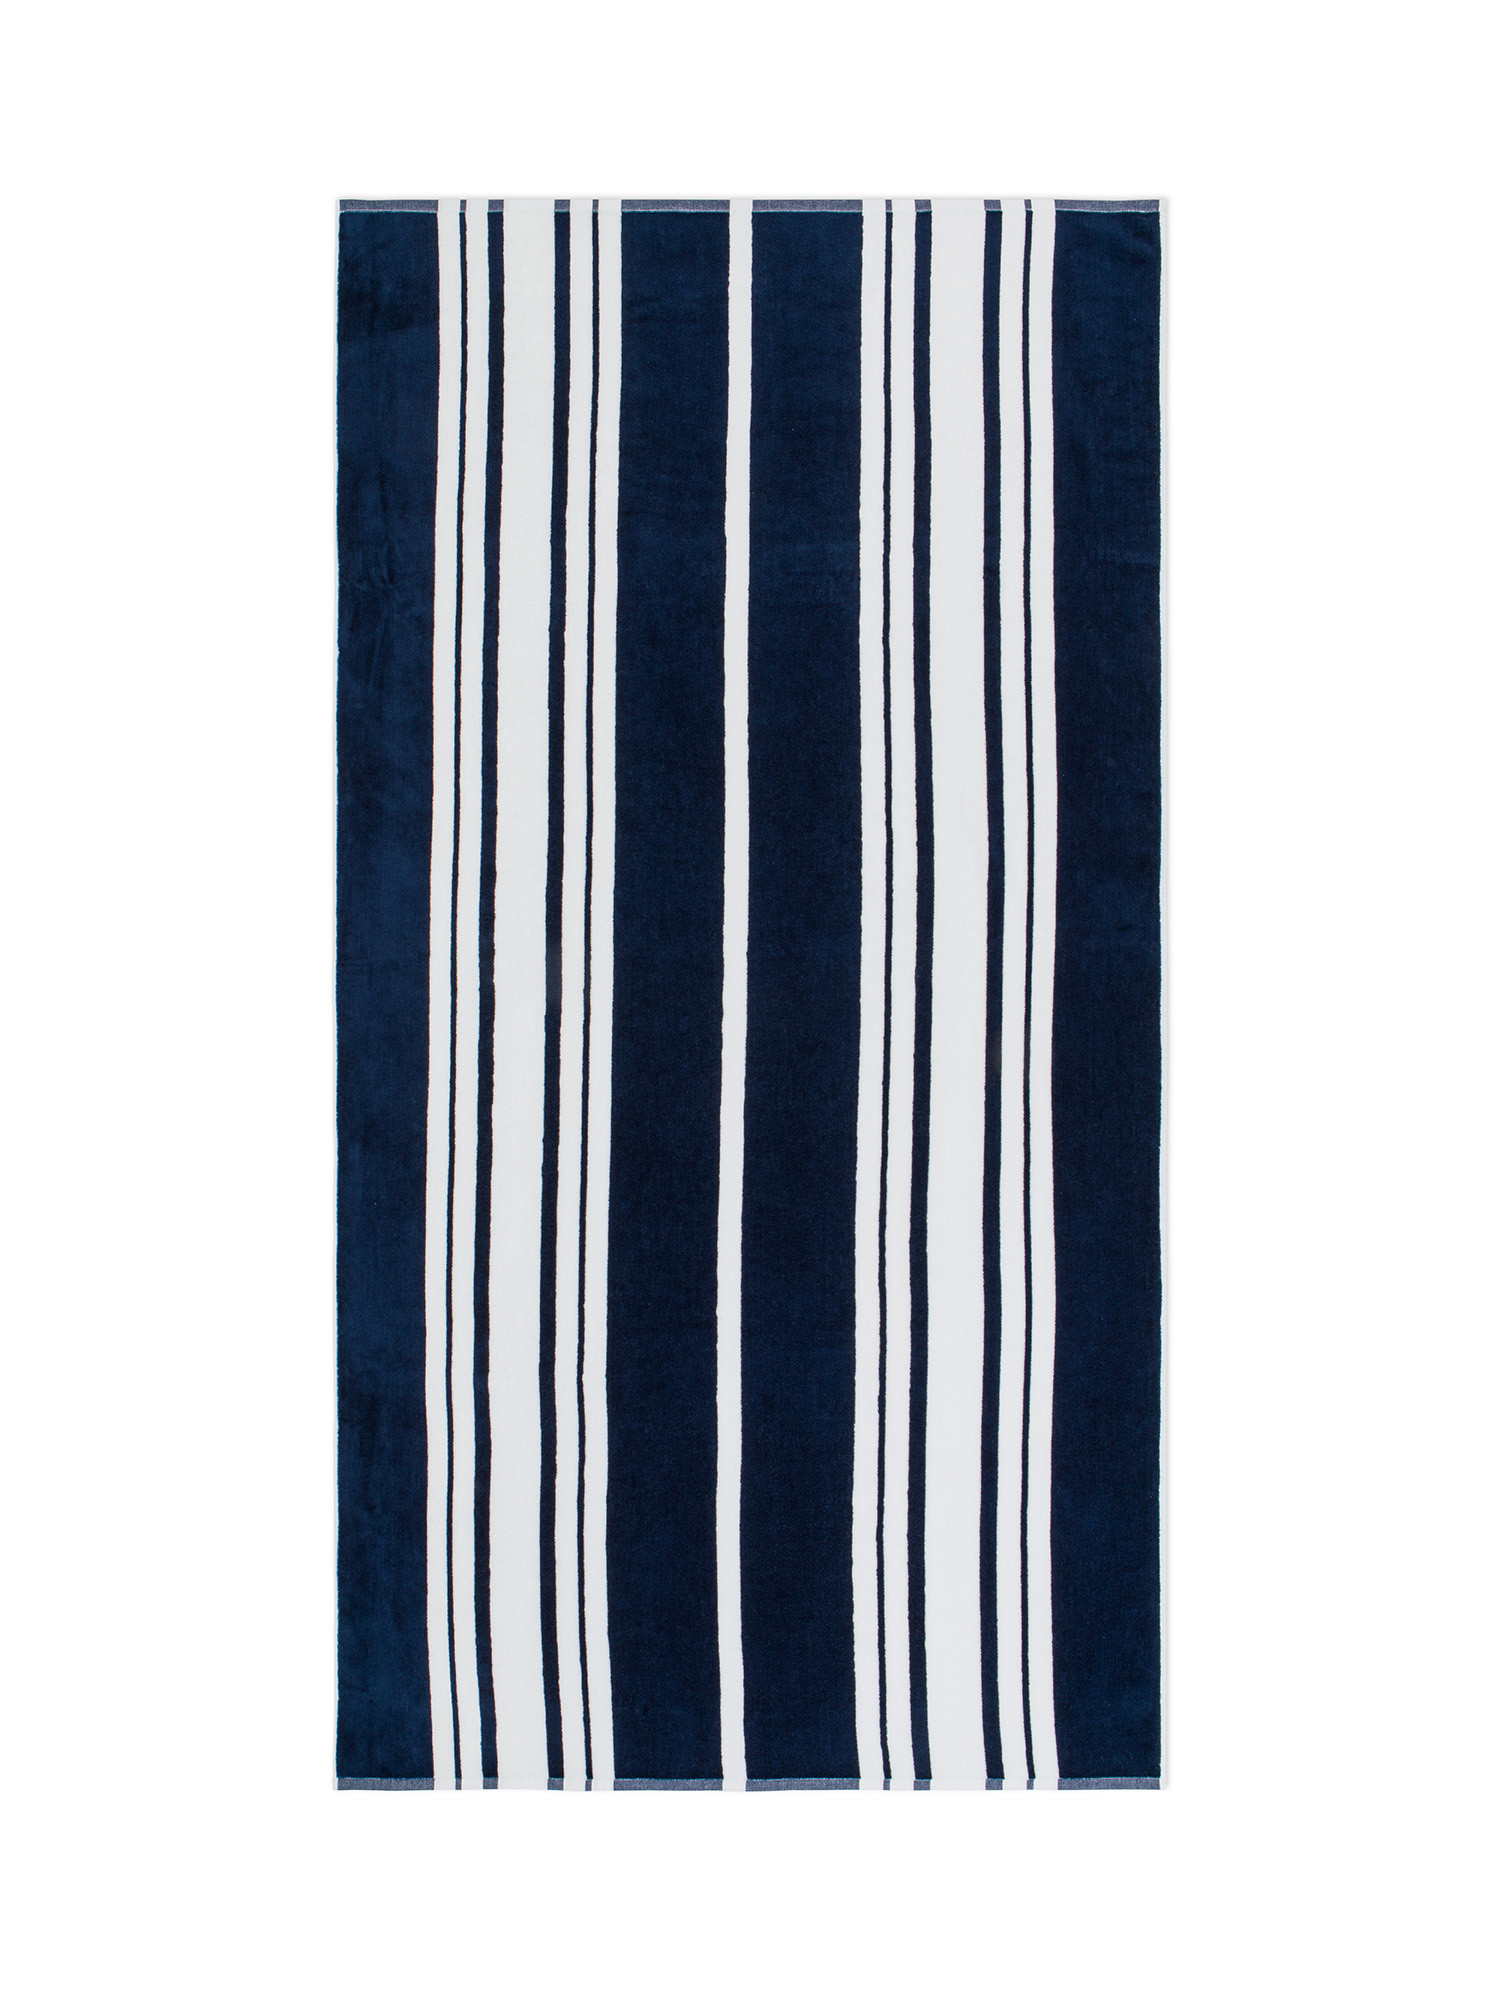 Striped velor cotton terry beach towel, Blue, large image number 0